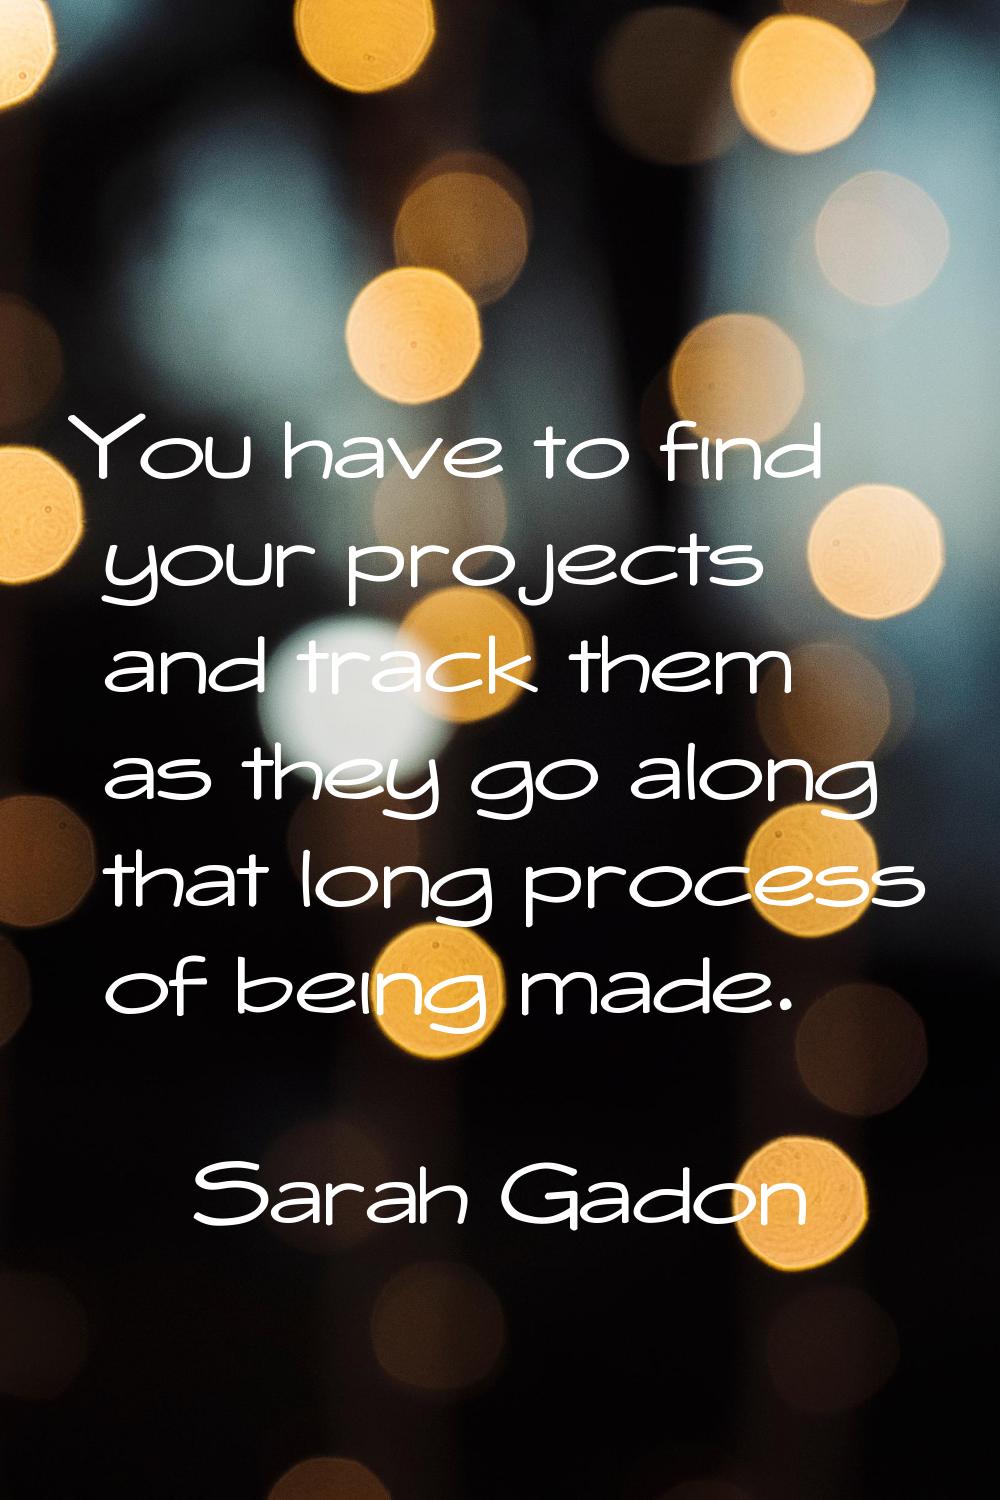 You have to find your projects and track them as they go along that long process of being made.